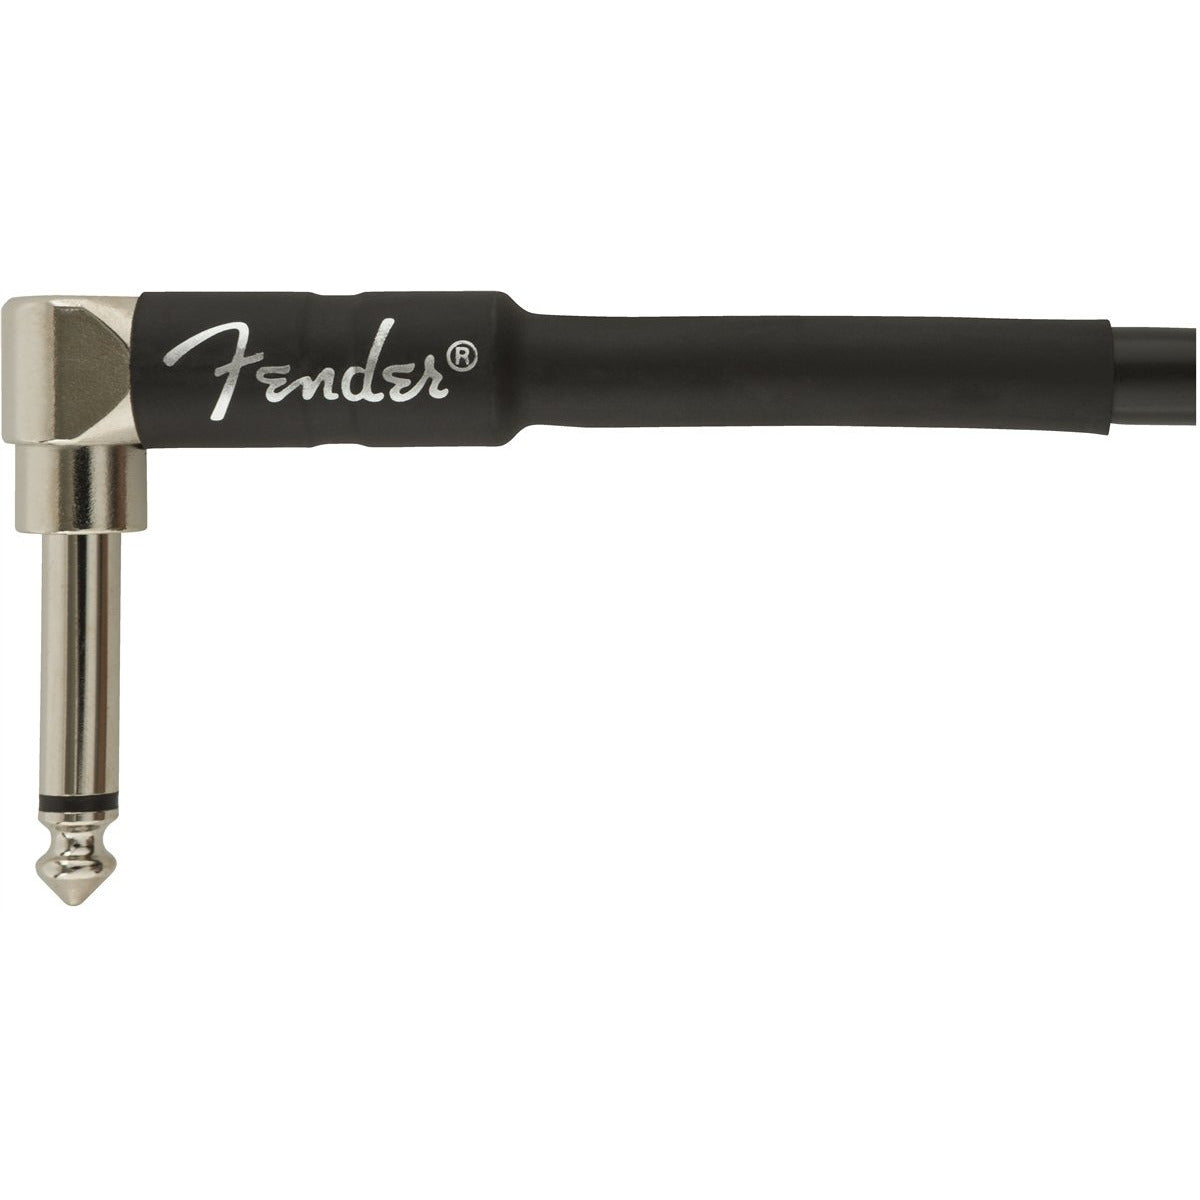 Image 3 of Fender Professional Series Instrument Cable, 18.6', Angled End, Black - SKU# FPRO-186A-B : Product Type Cables & Accessories : Elderly Instruments